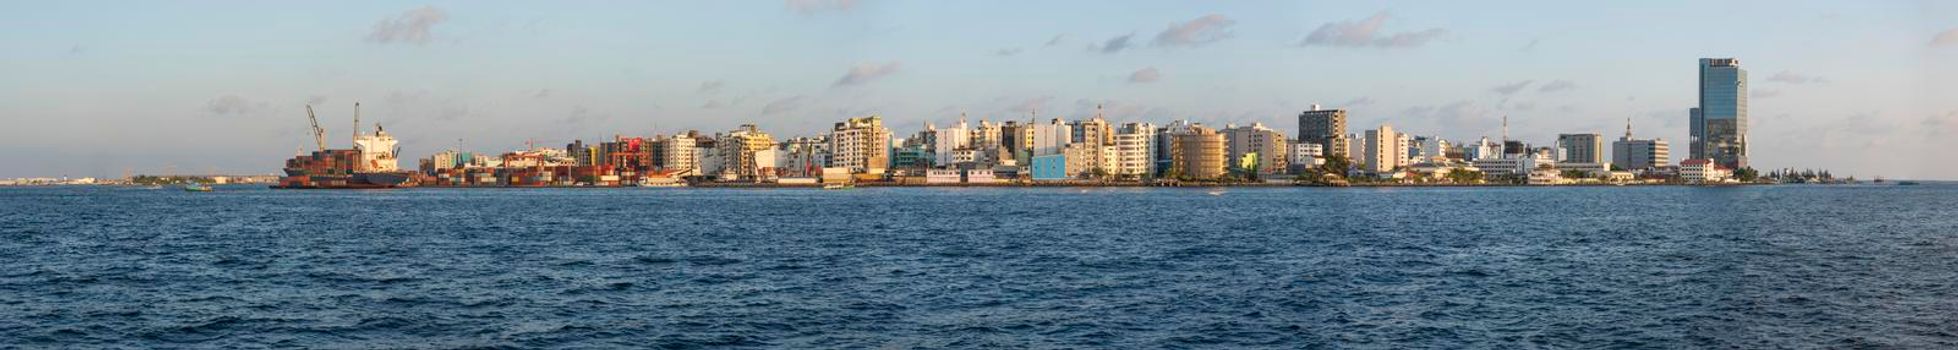 Panoramic scenic view of large island city of Male in Maldives with commercial shipping port and cargo ship